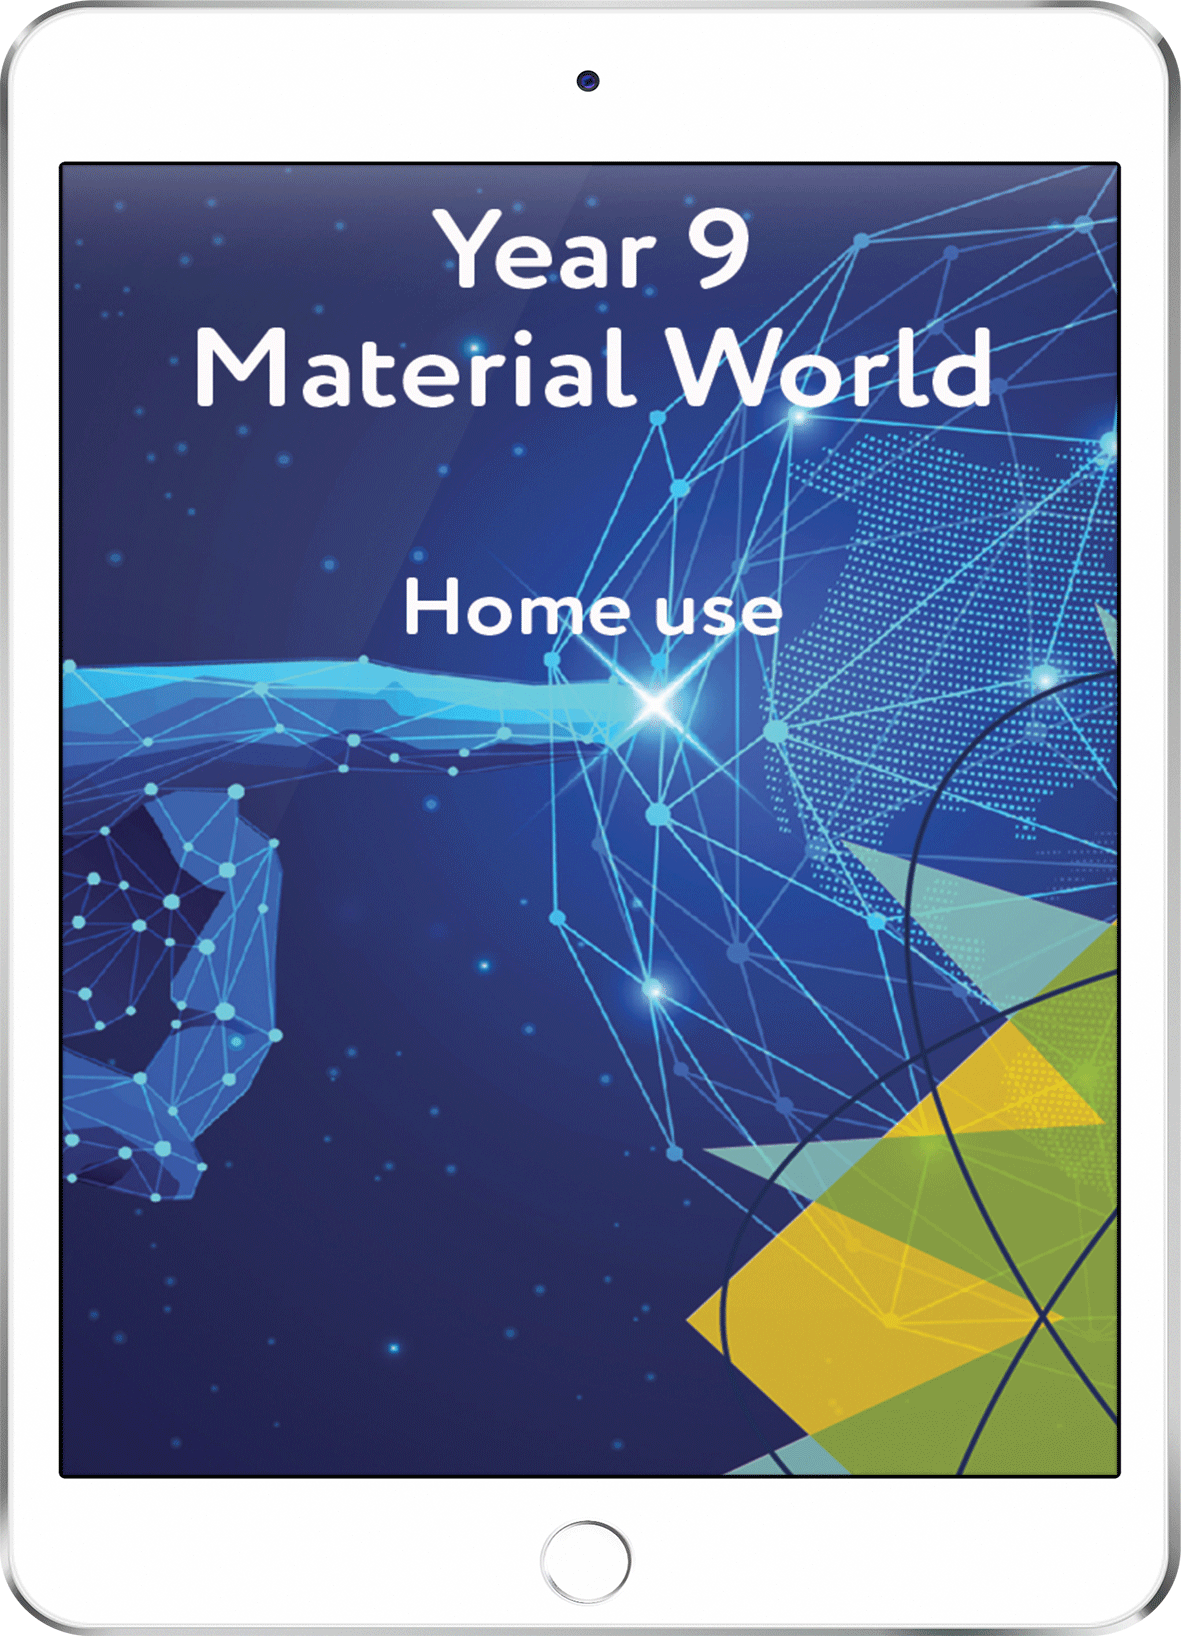 Year 9 Material World - Home Use